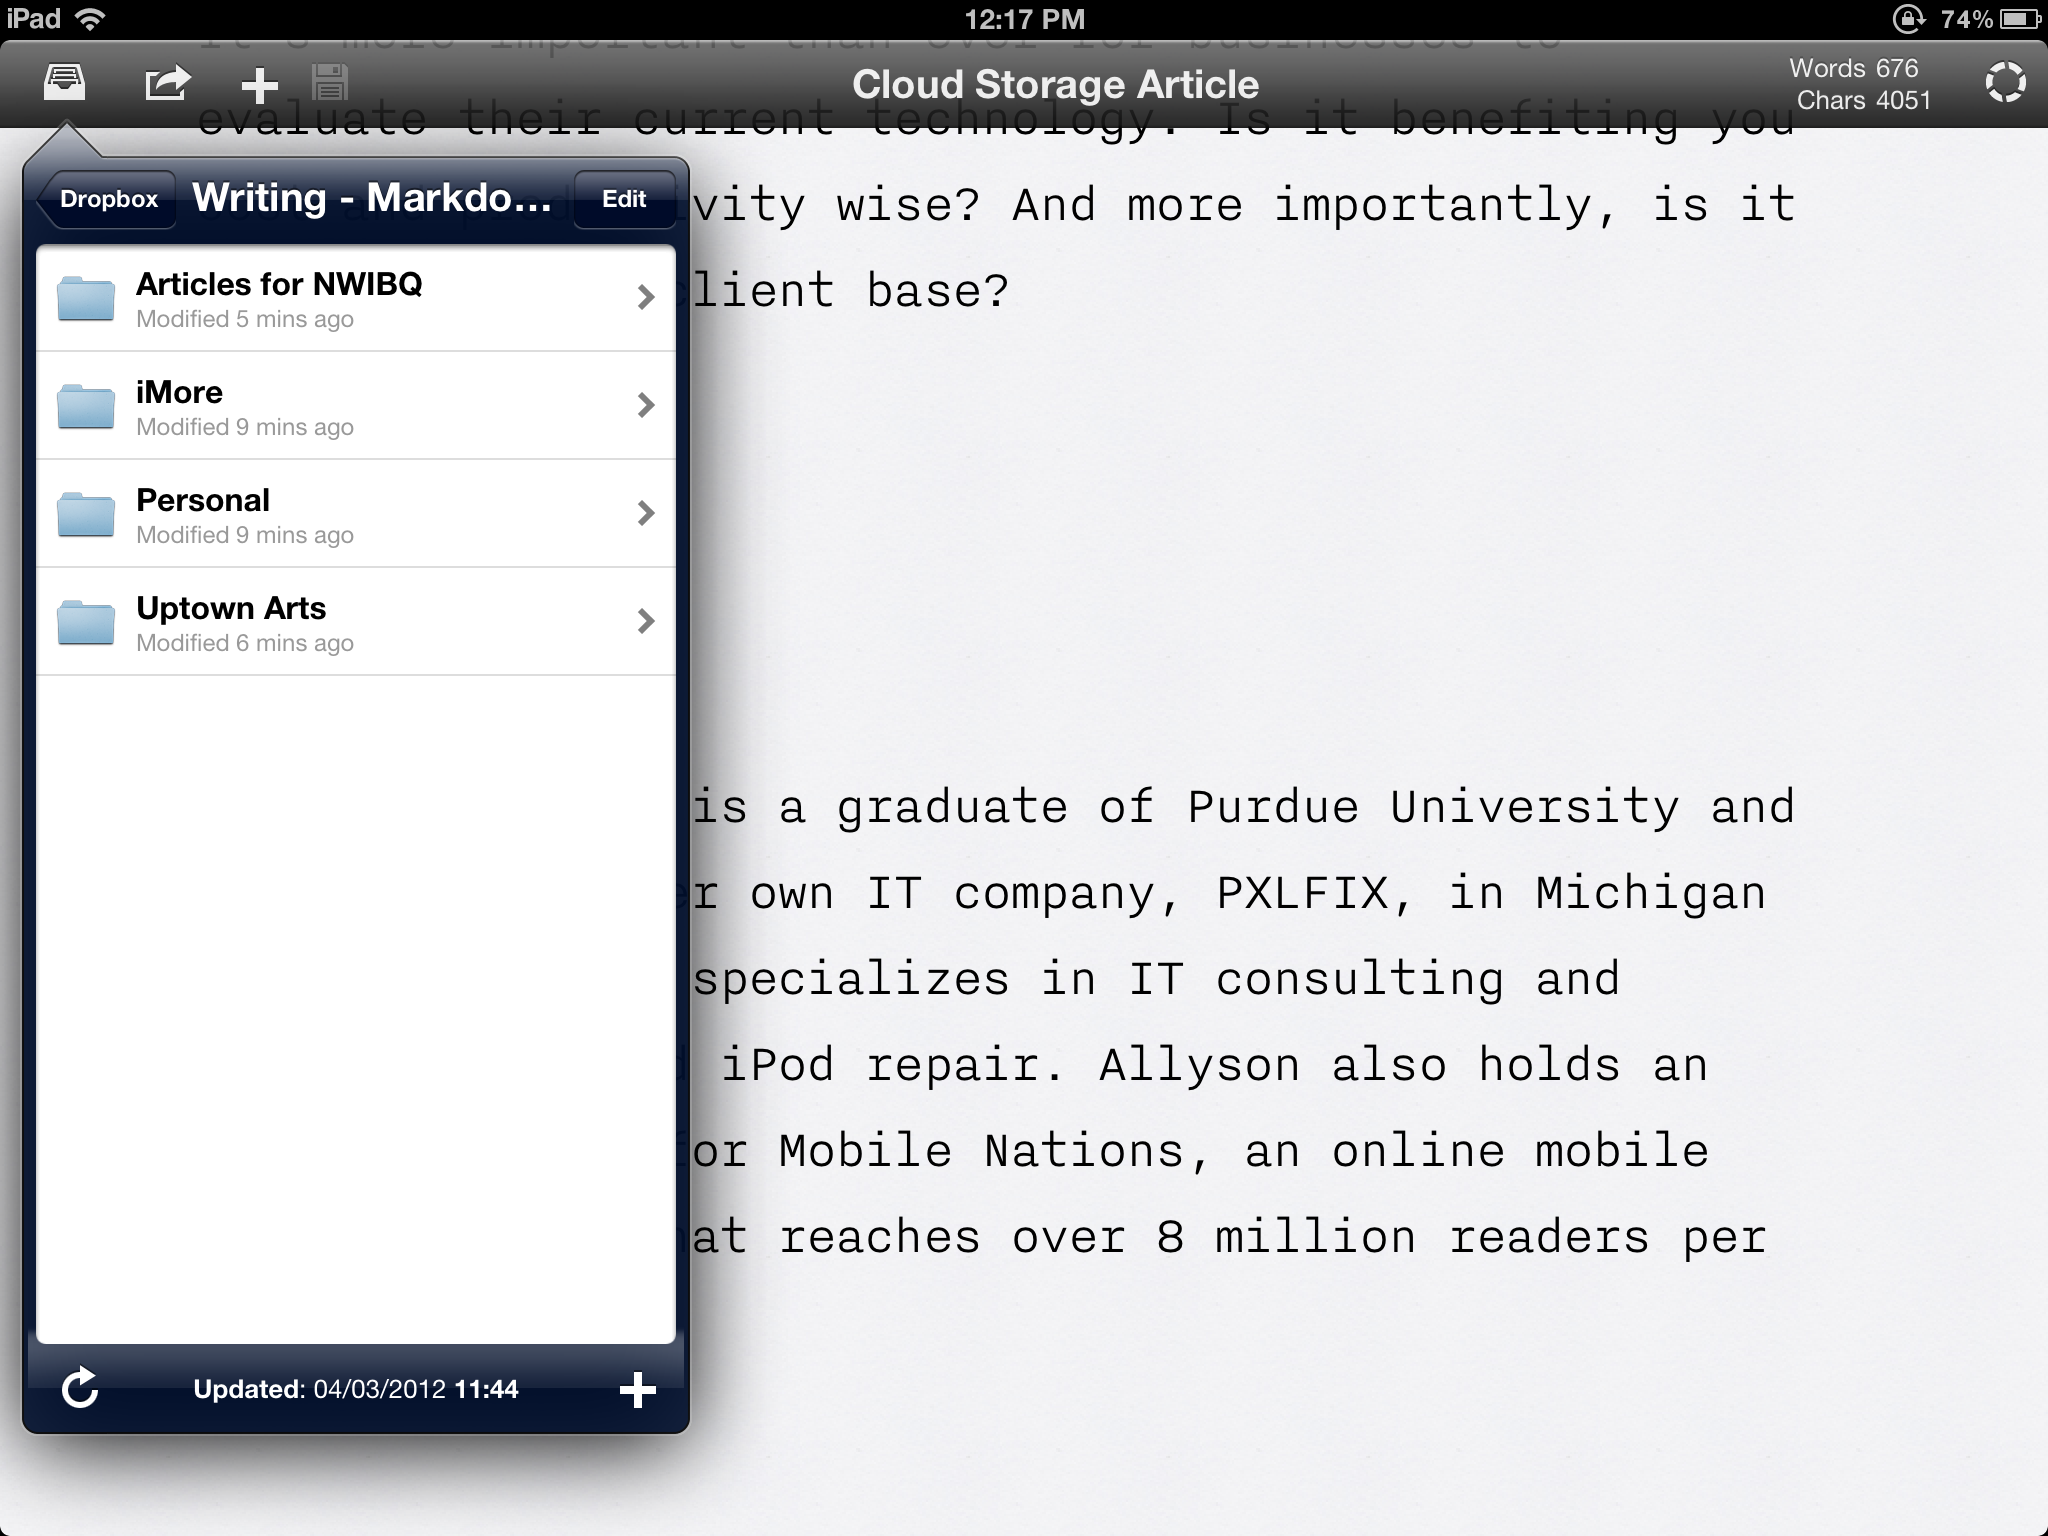 iA Writer for iPad allows you to change directories and locations easily